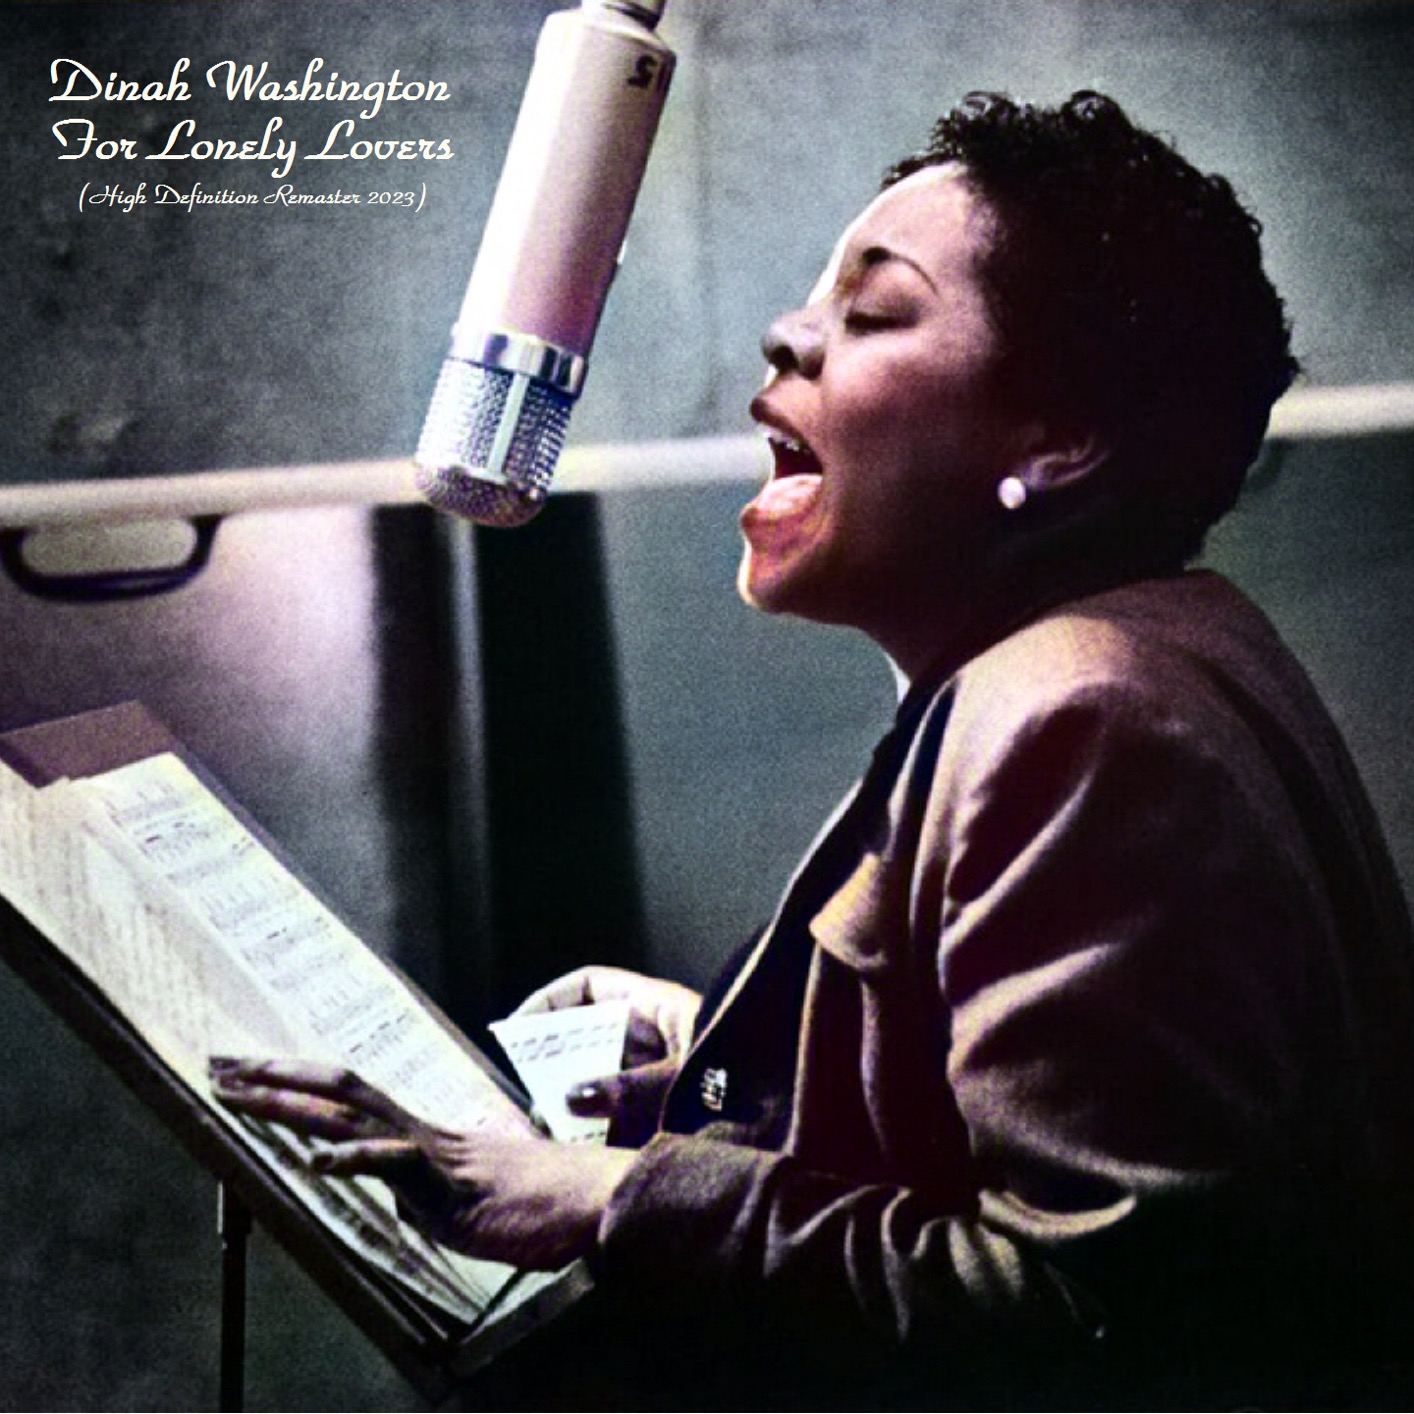 Dinah Washington - For Lonely Lovers (High Definition Remaster 2023) (2022/2023) [FLAC 24bit/44,1kHz]